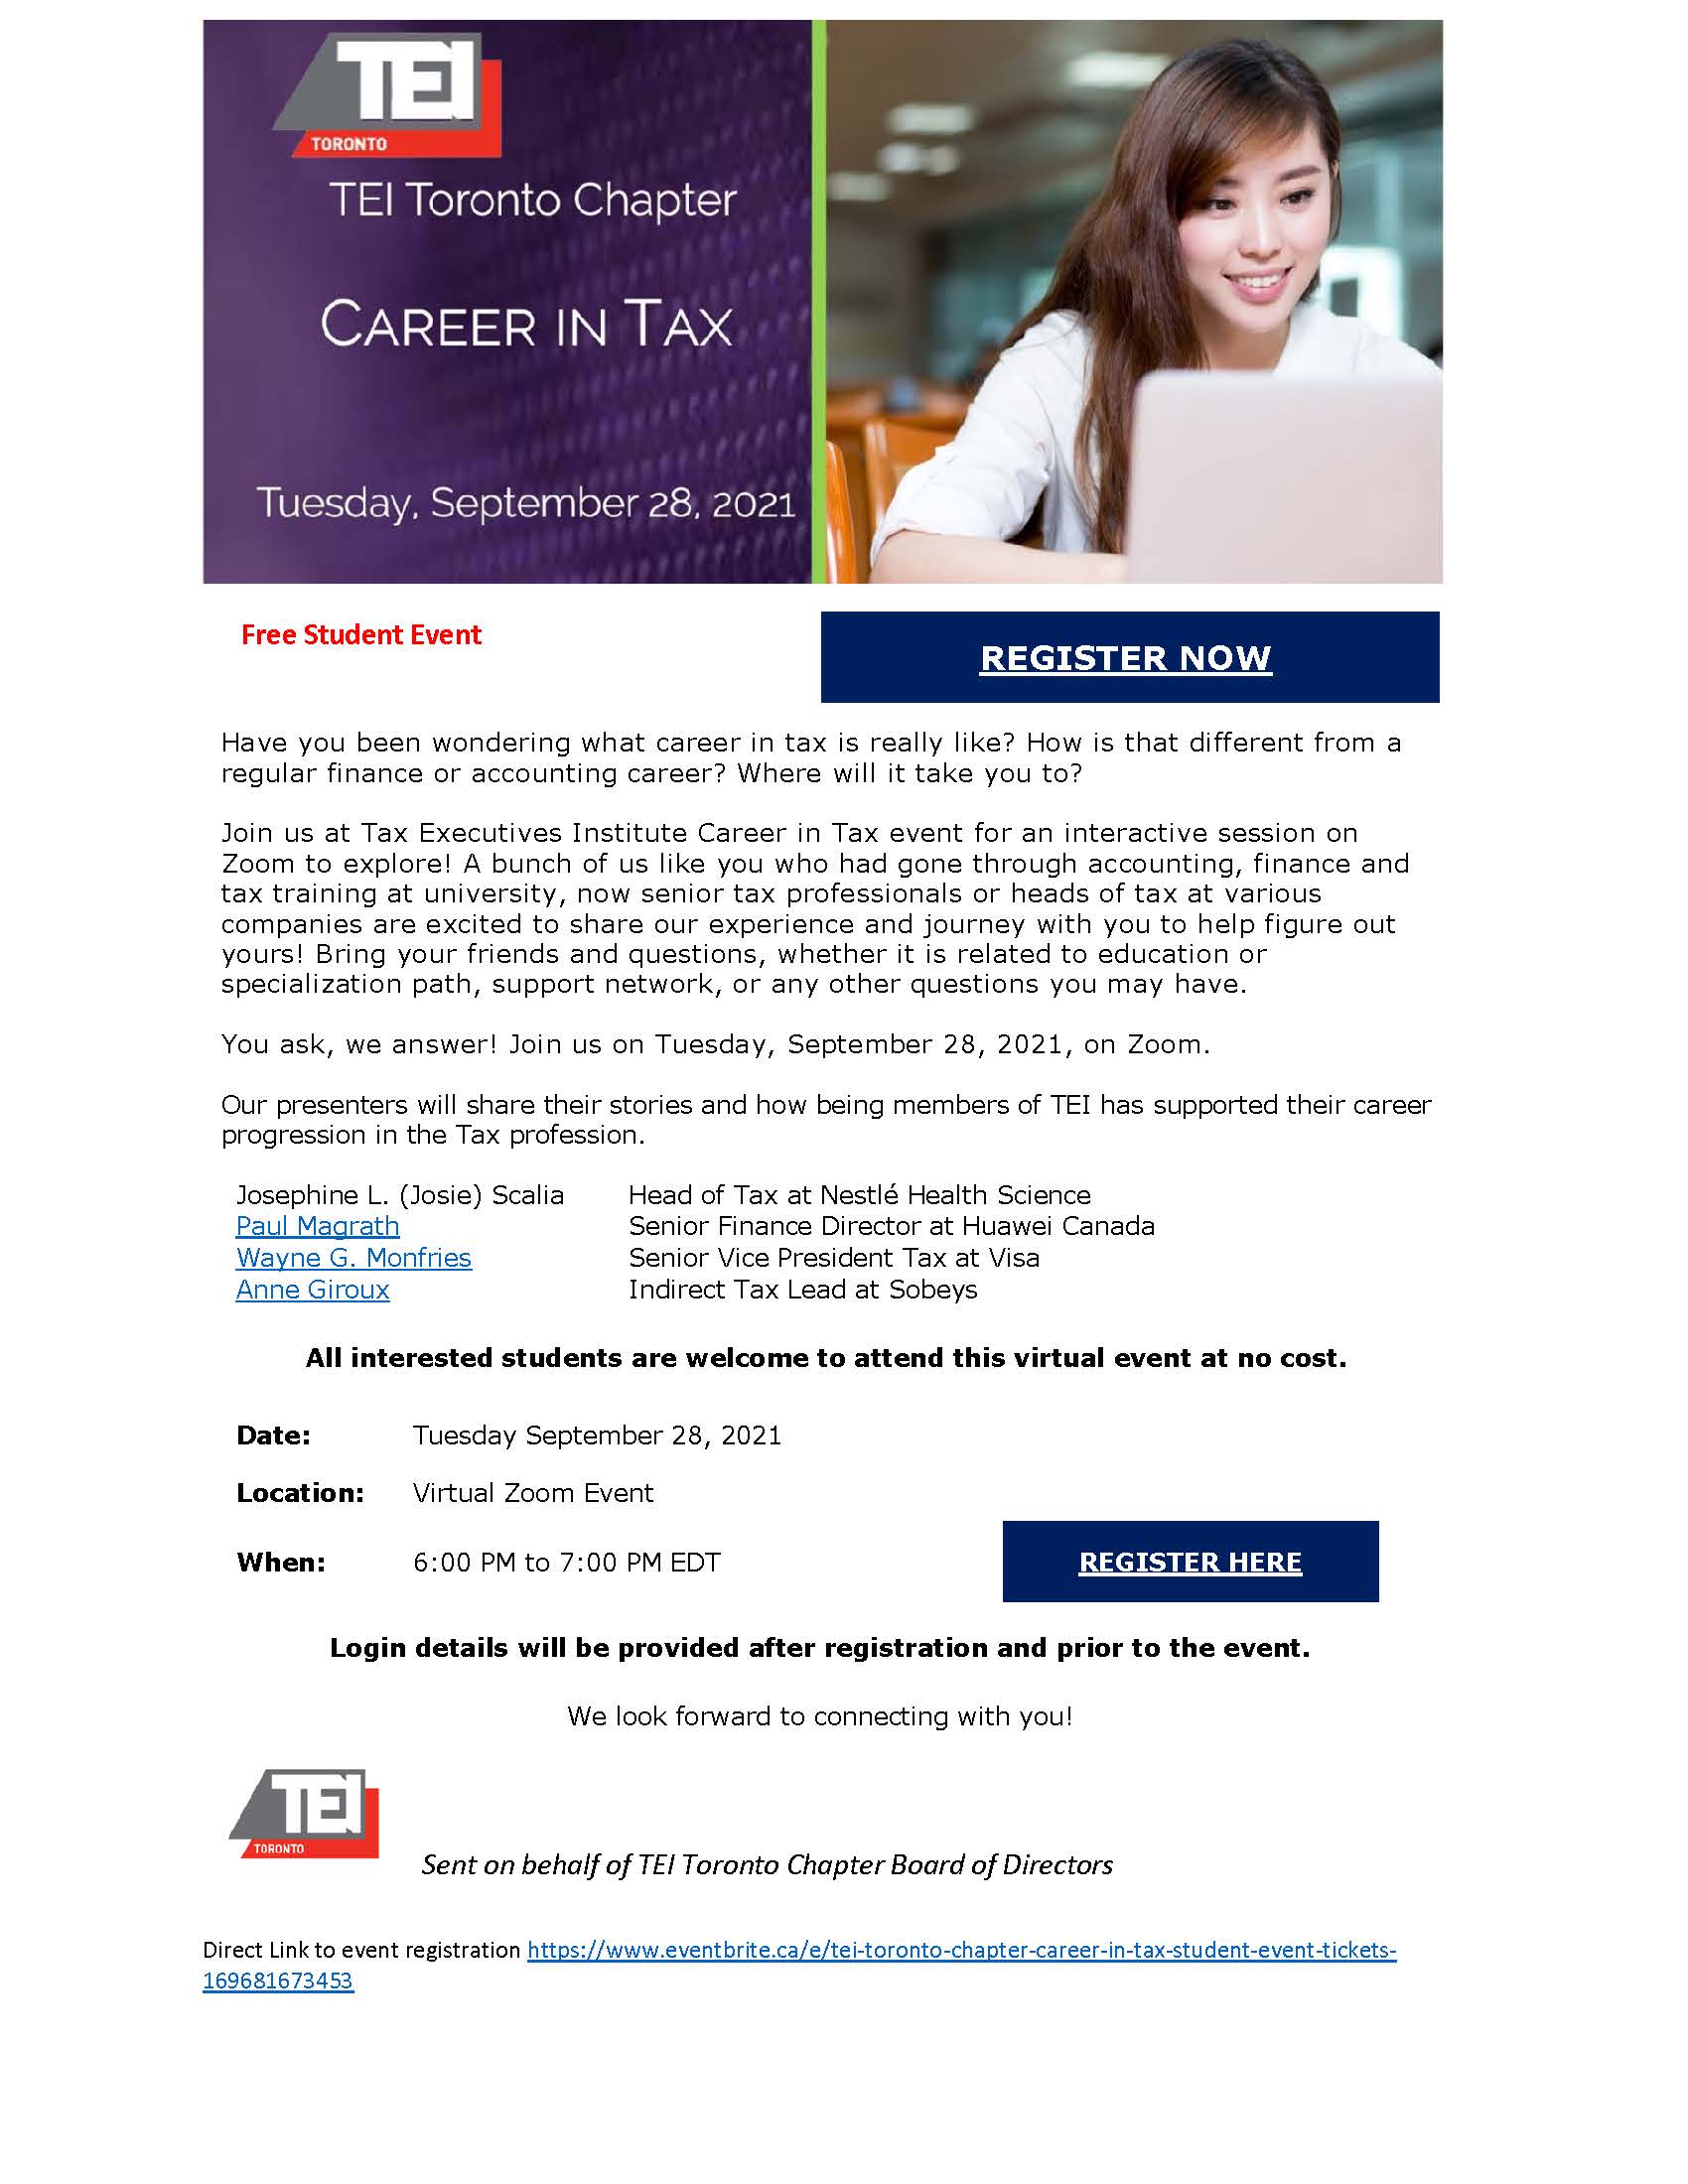 tax-executives-institute-career-in-tax-interactive-session-september